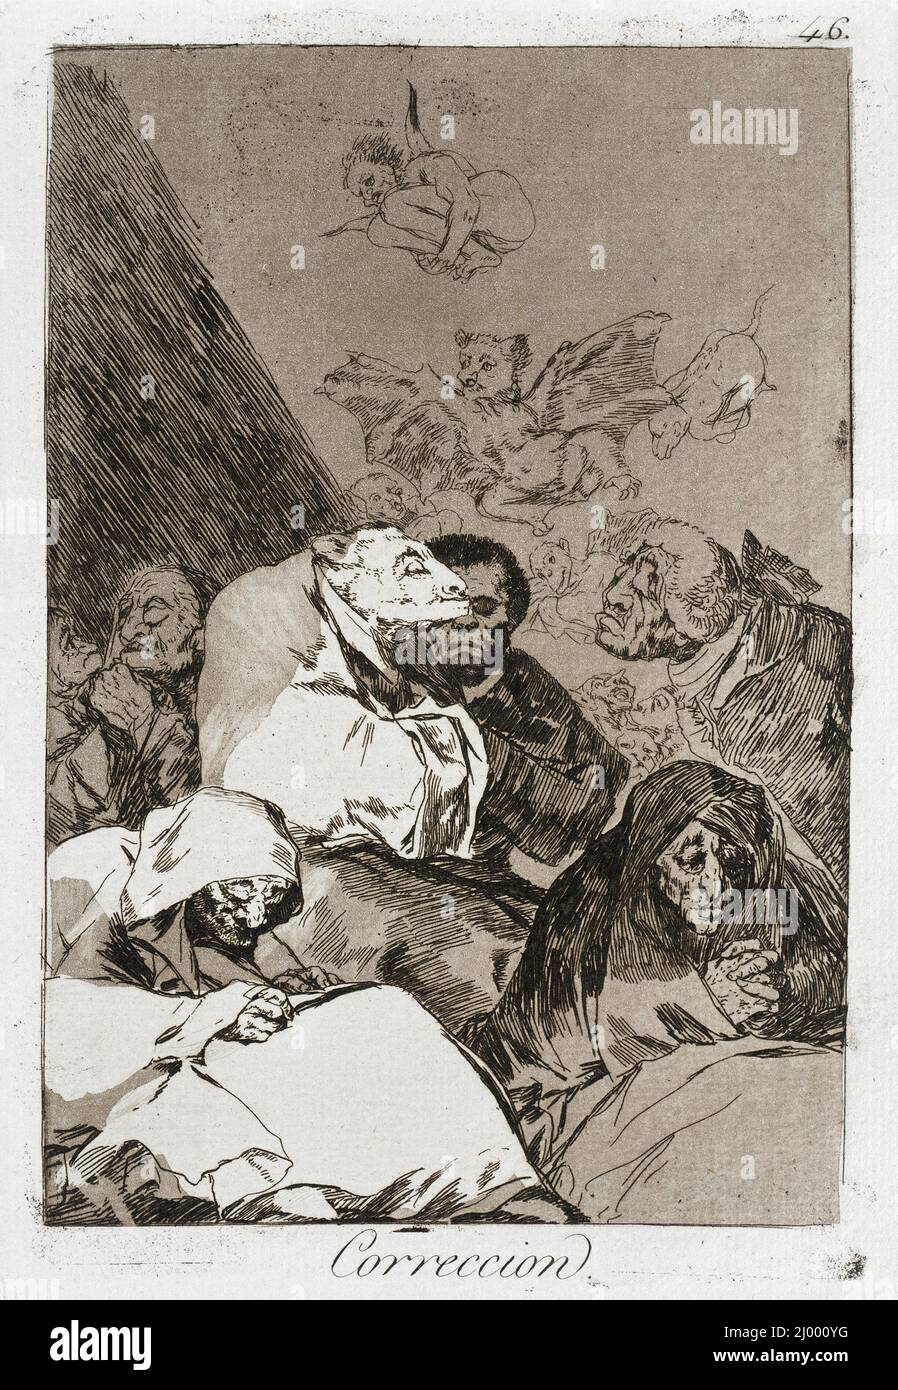 Correction. Francisco Goya y Lucientes (Spain, Fuendetodos, 1746-1828). Spain, 1799. Prints; etchings. Etching and burnished aquatint Stock Photo